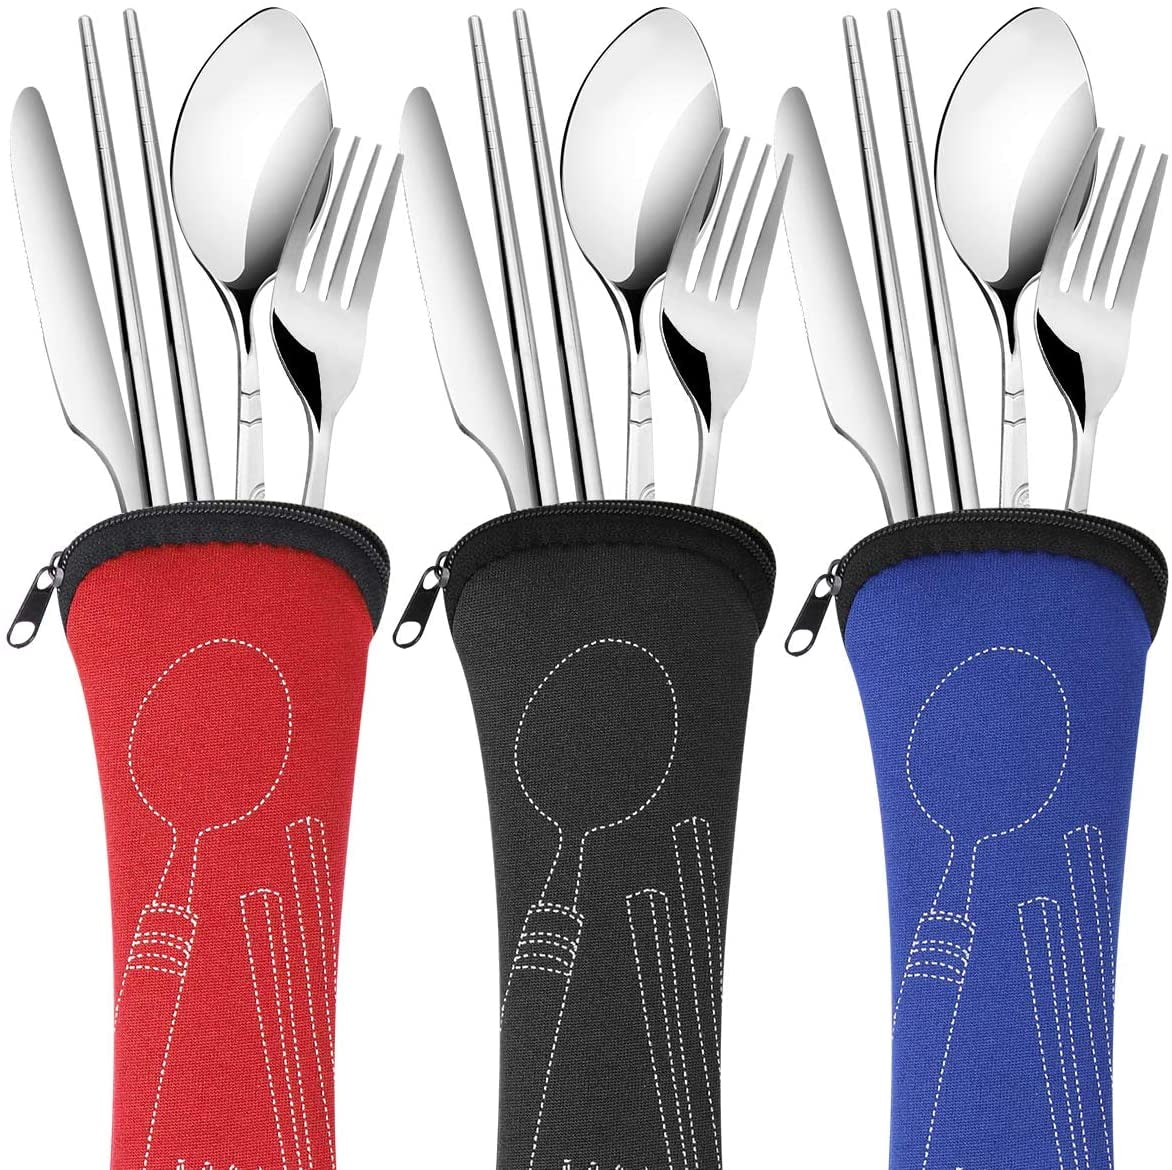 Reusable Utensils Set with Case, 4 Sets Plastic Spoons and Forks Set  Plastic Camping Utensil Set, Travel Cutlery Set Lunch Box Accessories for  Teens